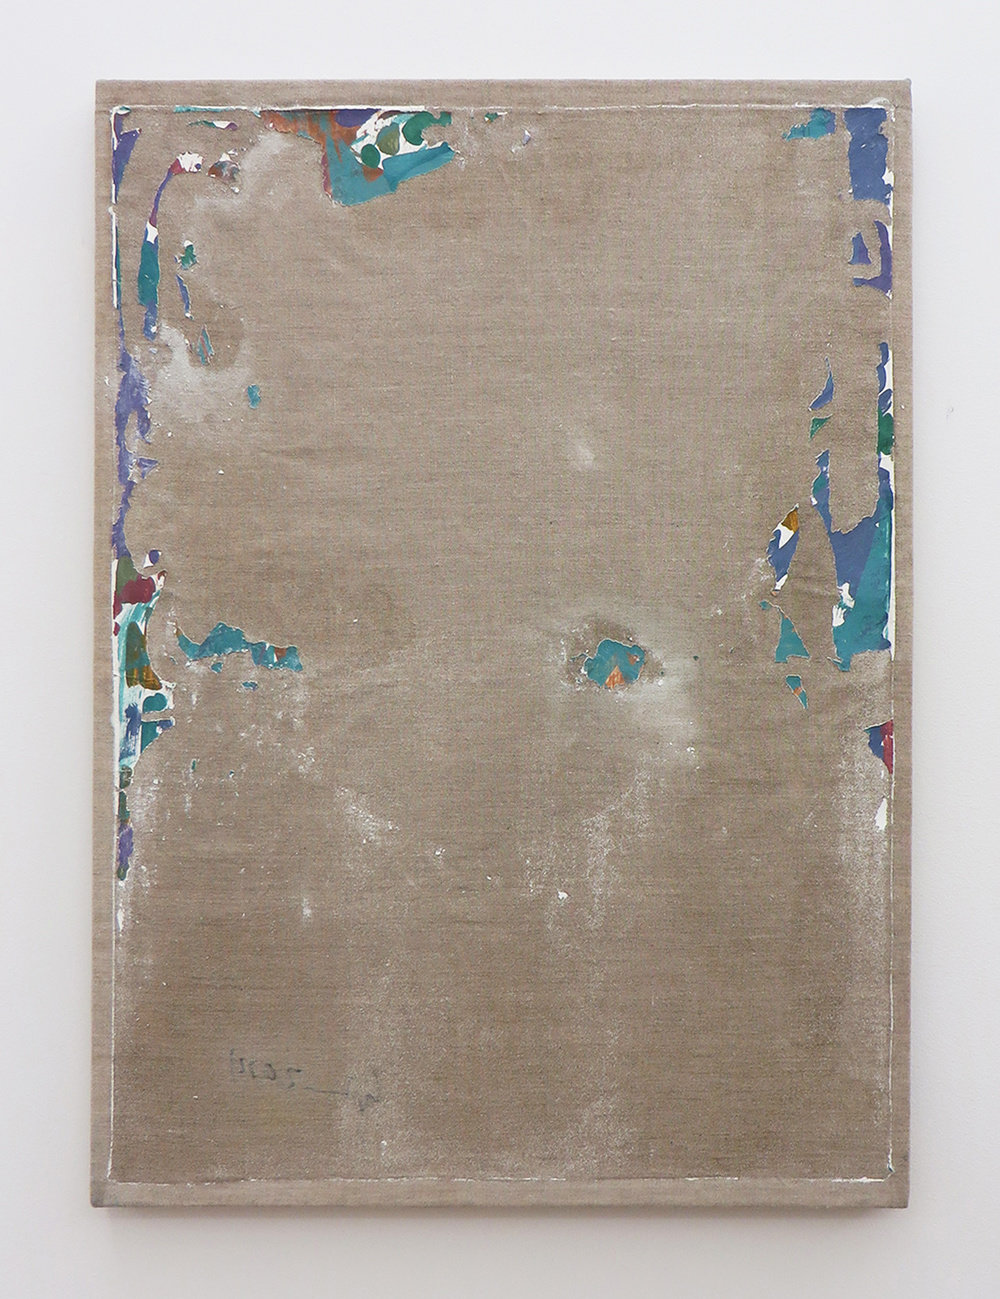 Ajemian, laundered painting (25x18) i, 2014, painting on linen, 25 x 18 in. 63.5 x 45.72 cm, cnon 54.719